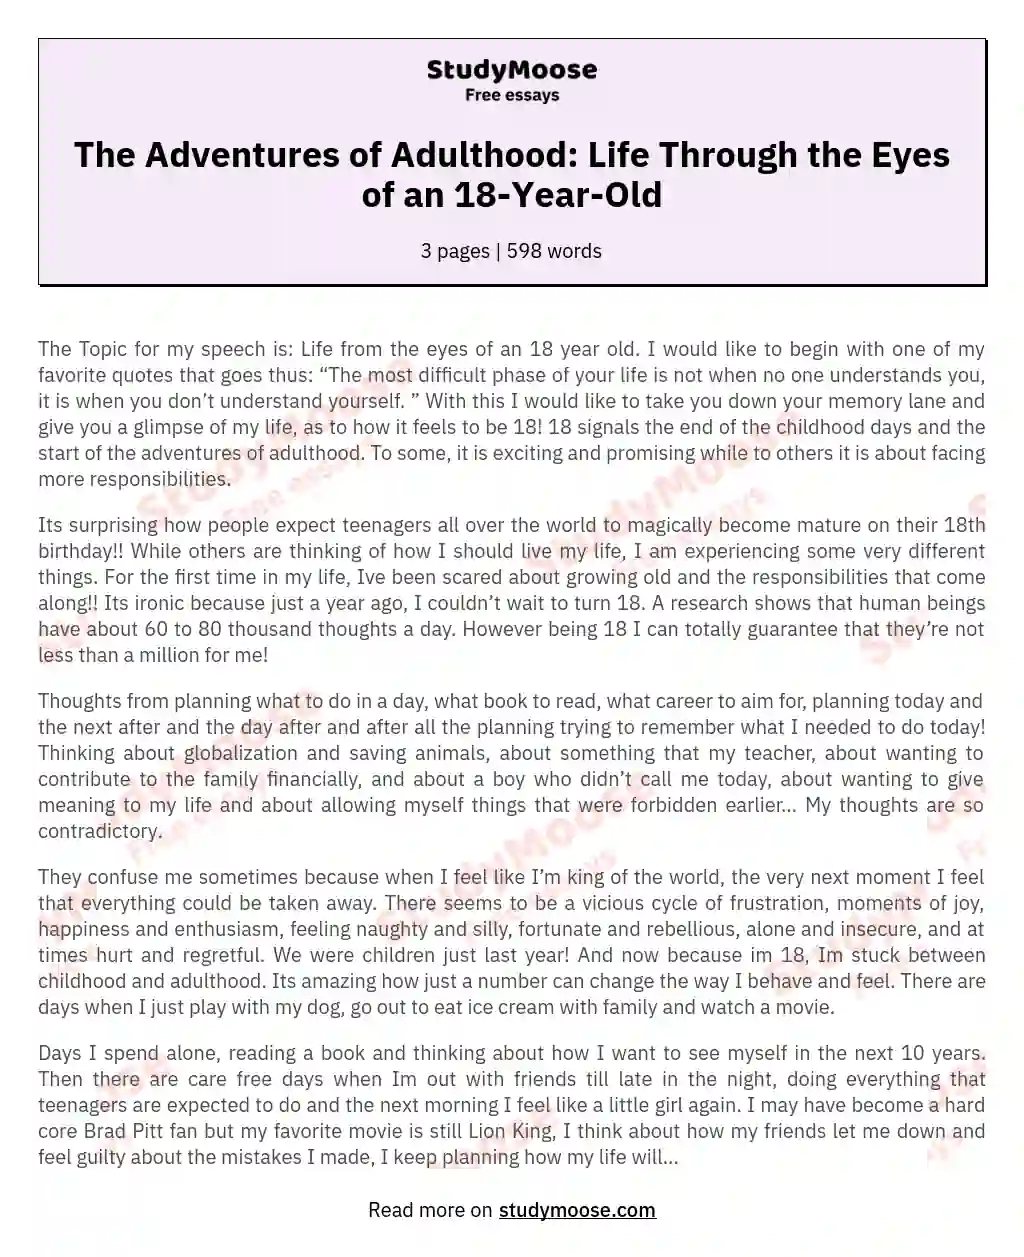 The Adventures of Adulthood: Life Through the Eyes of an 18-Year-Old essay